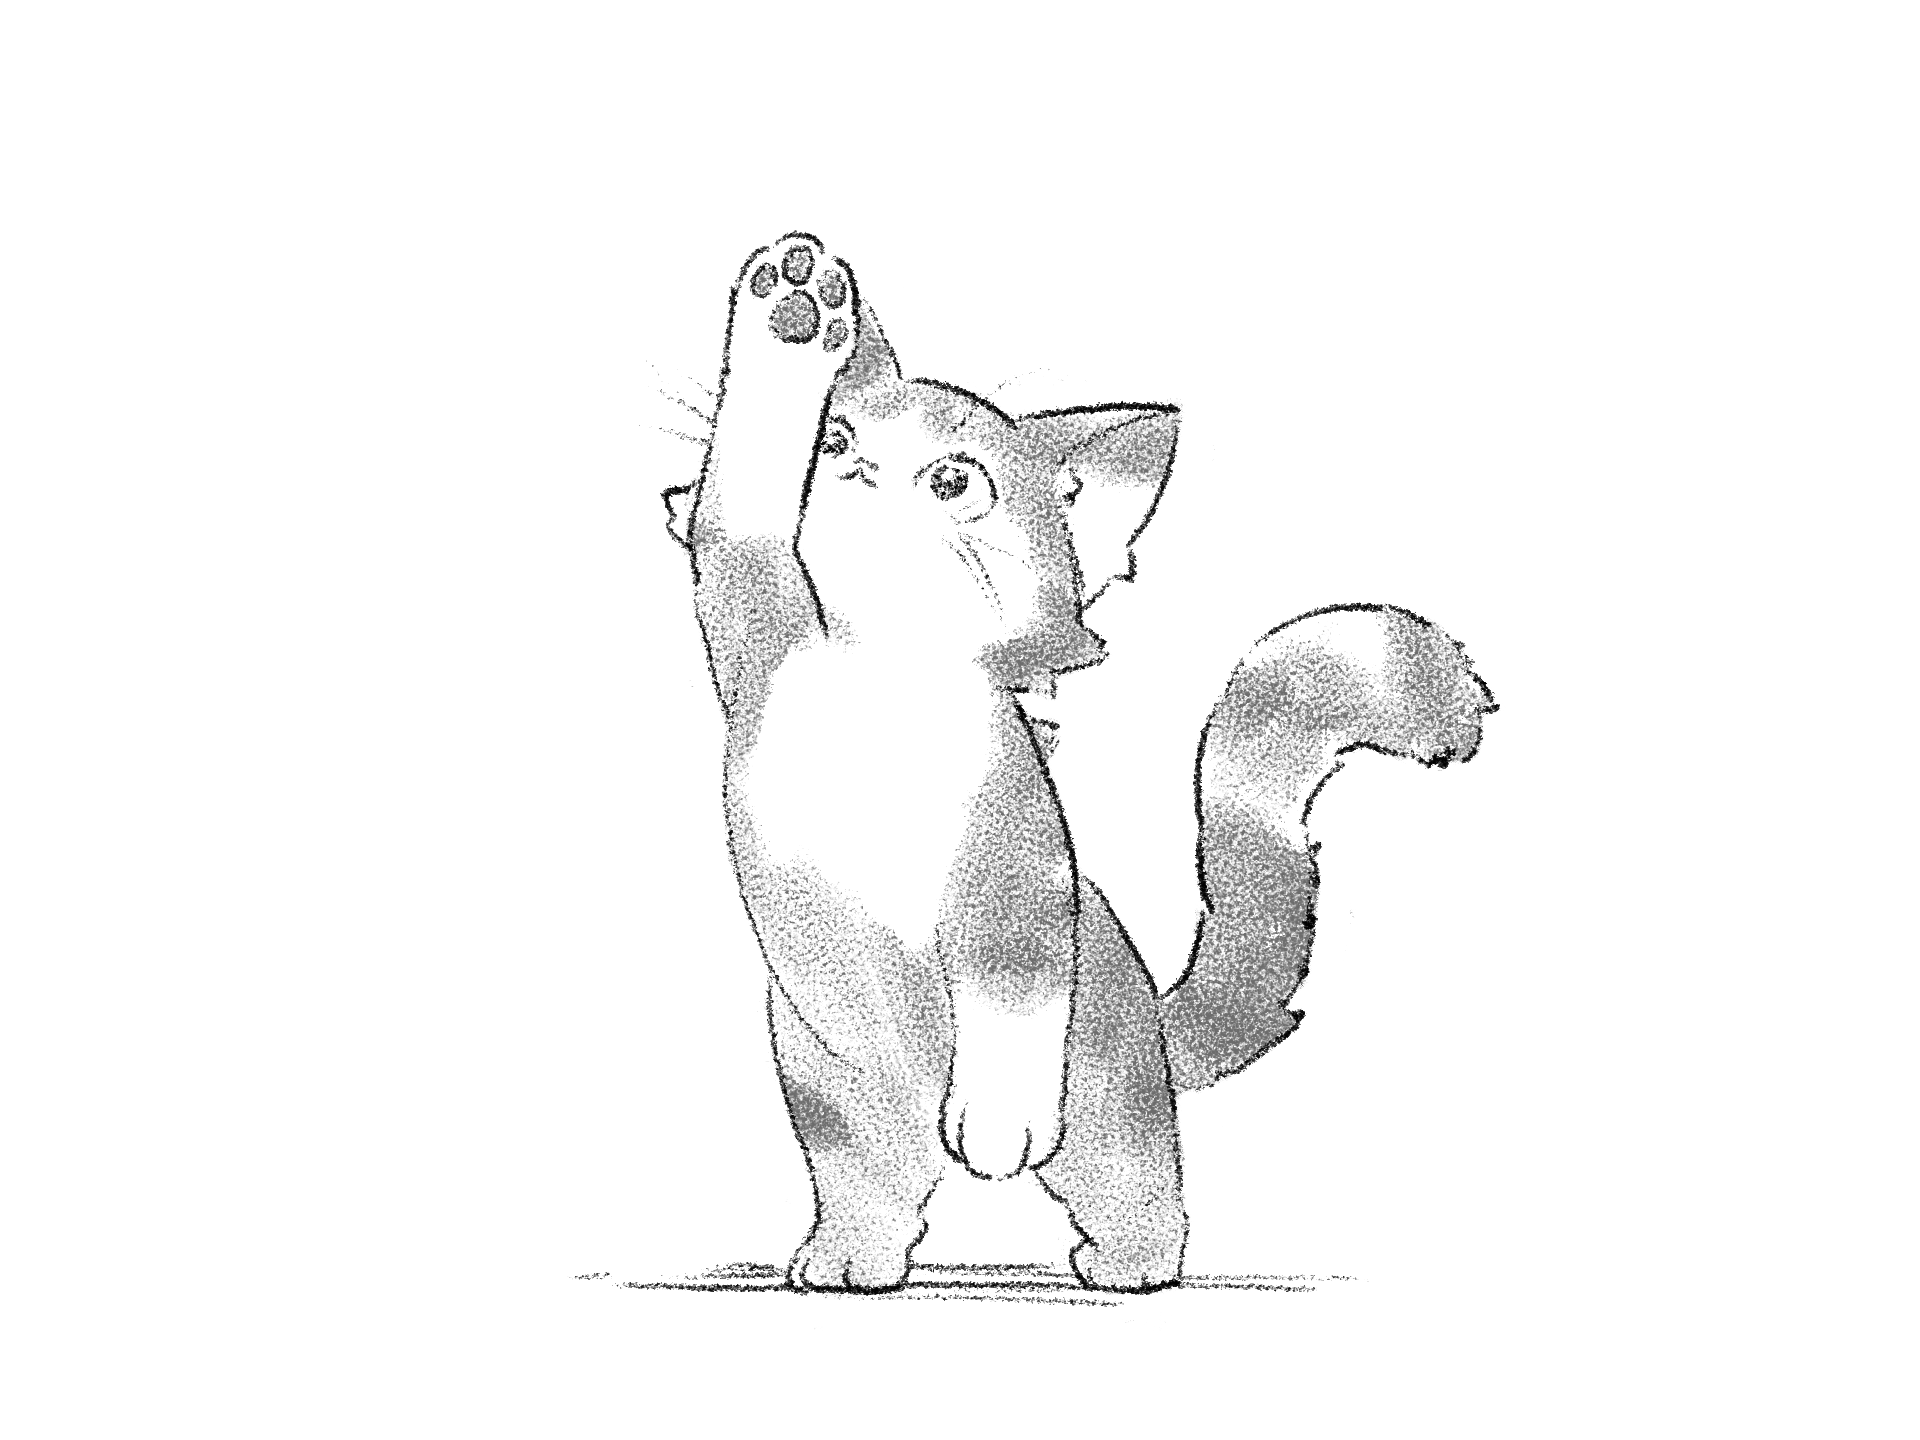 A cat, from The Cat and the Right Hook, a short story